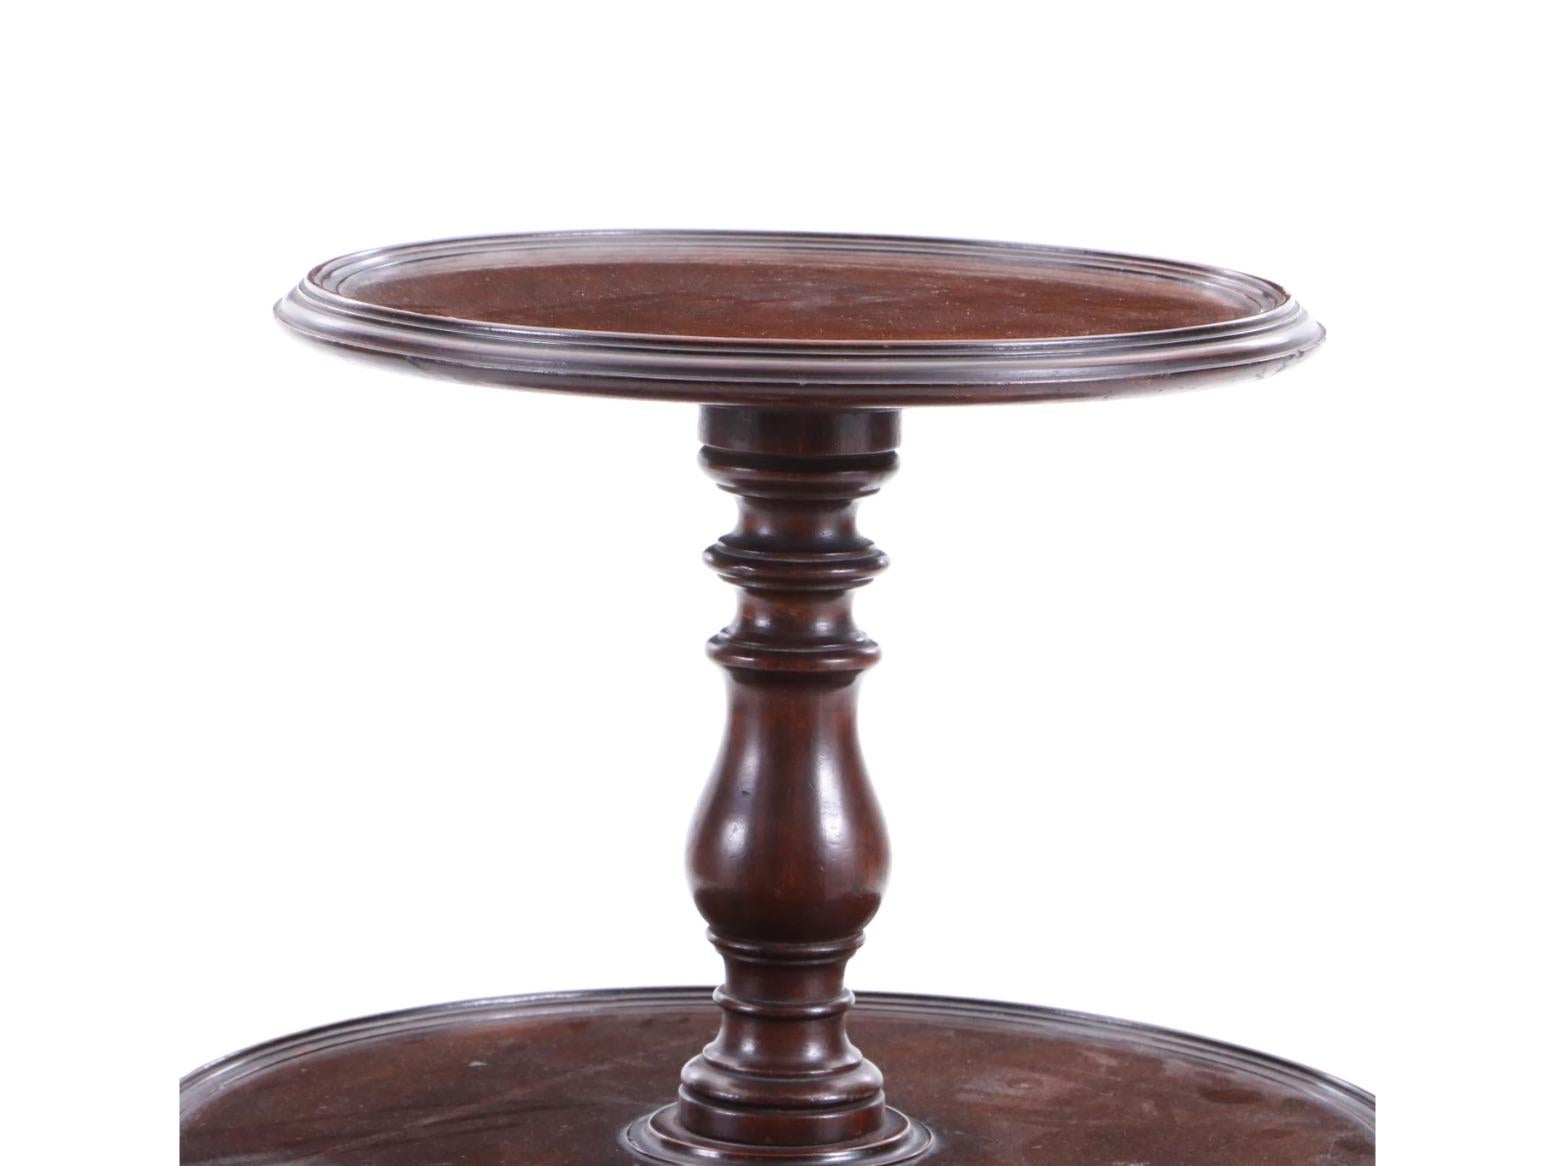 A lovely mahogany 19th century dessert serving table-known as a dumbwaiter. 
Features 3 circular serving table tops of varying heights and sizes. A beautiful Turned Center Column with a Carved 3 leg Base with Splayed legs, recessed casters, and a